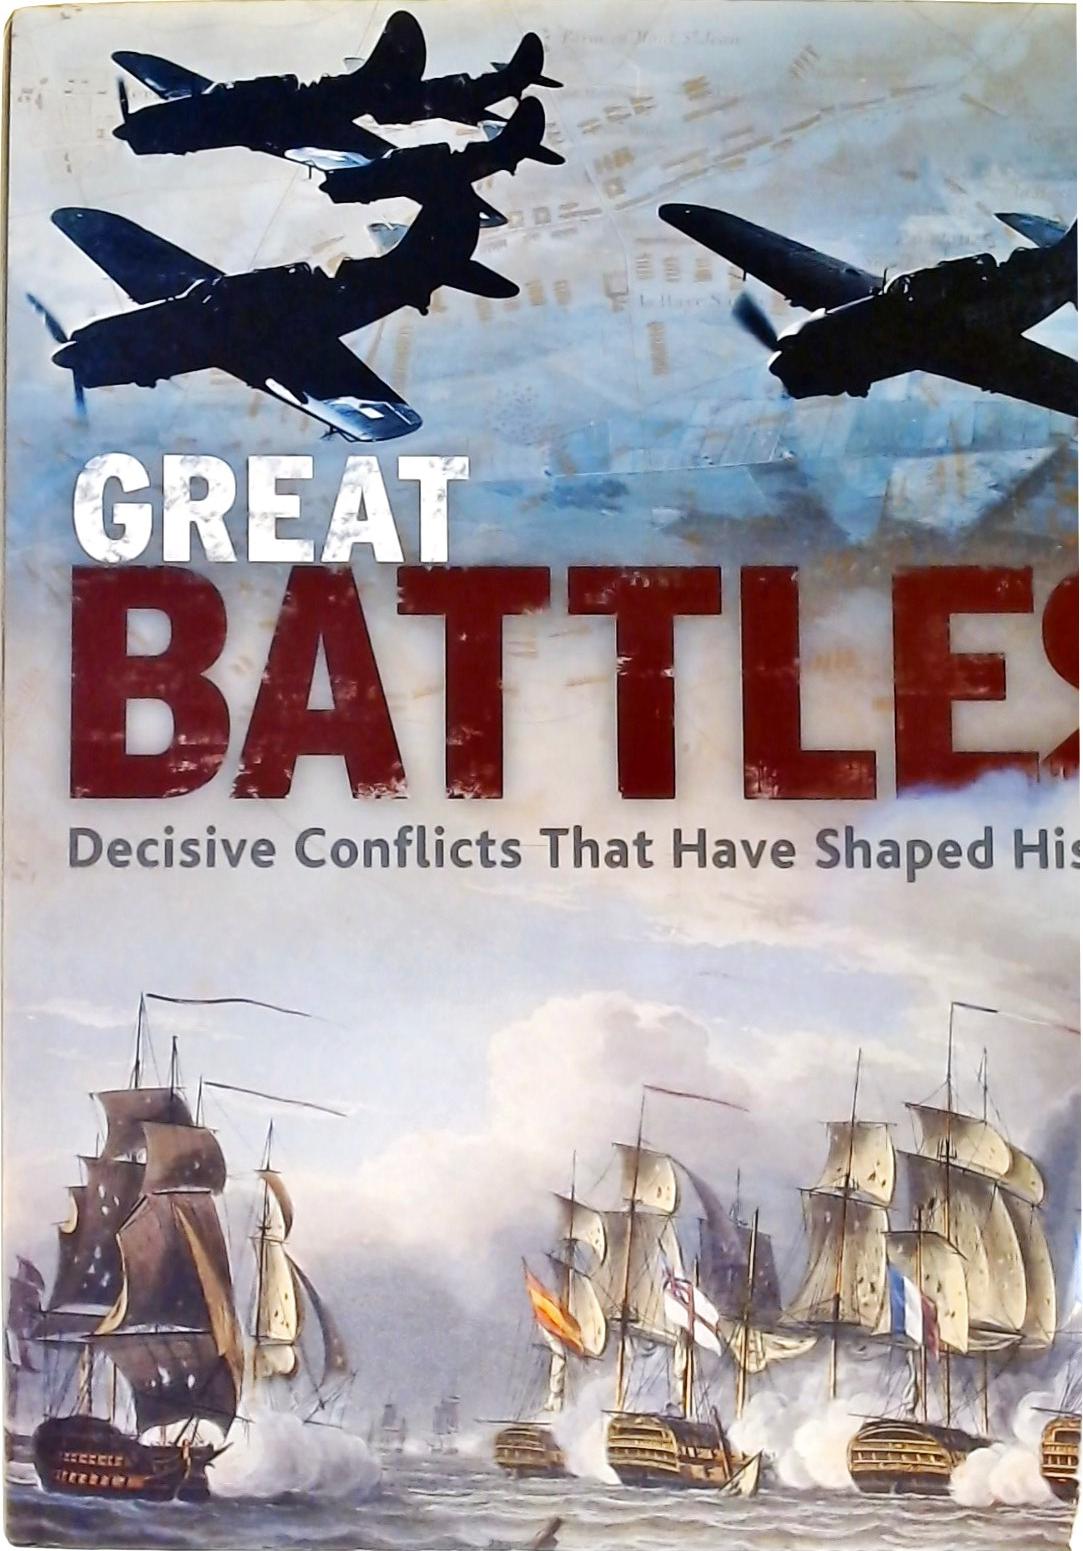 Great Battles - Decisive Conflicts That Have Shaped History